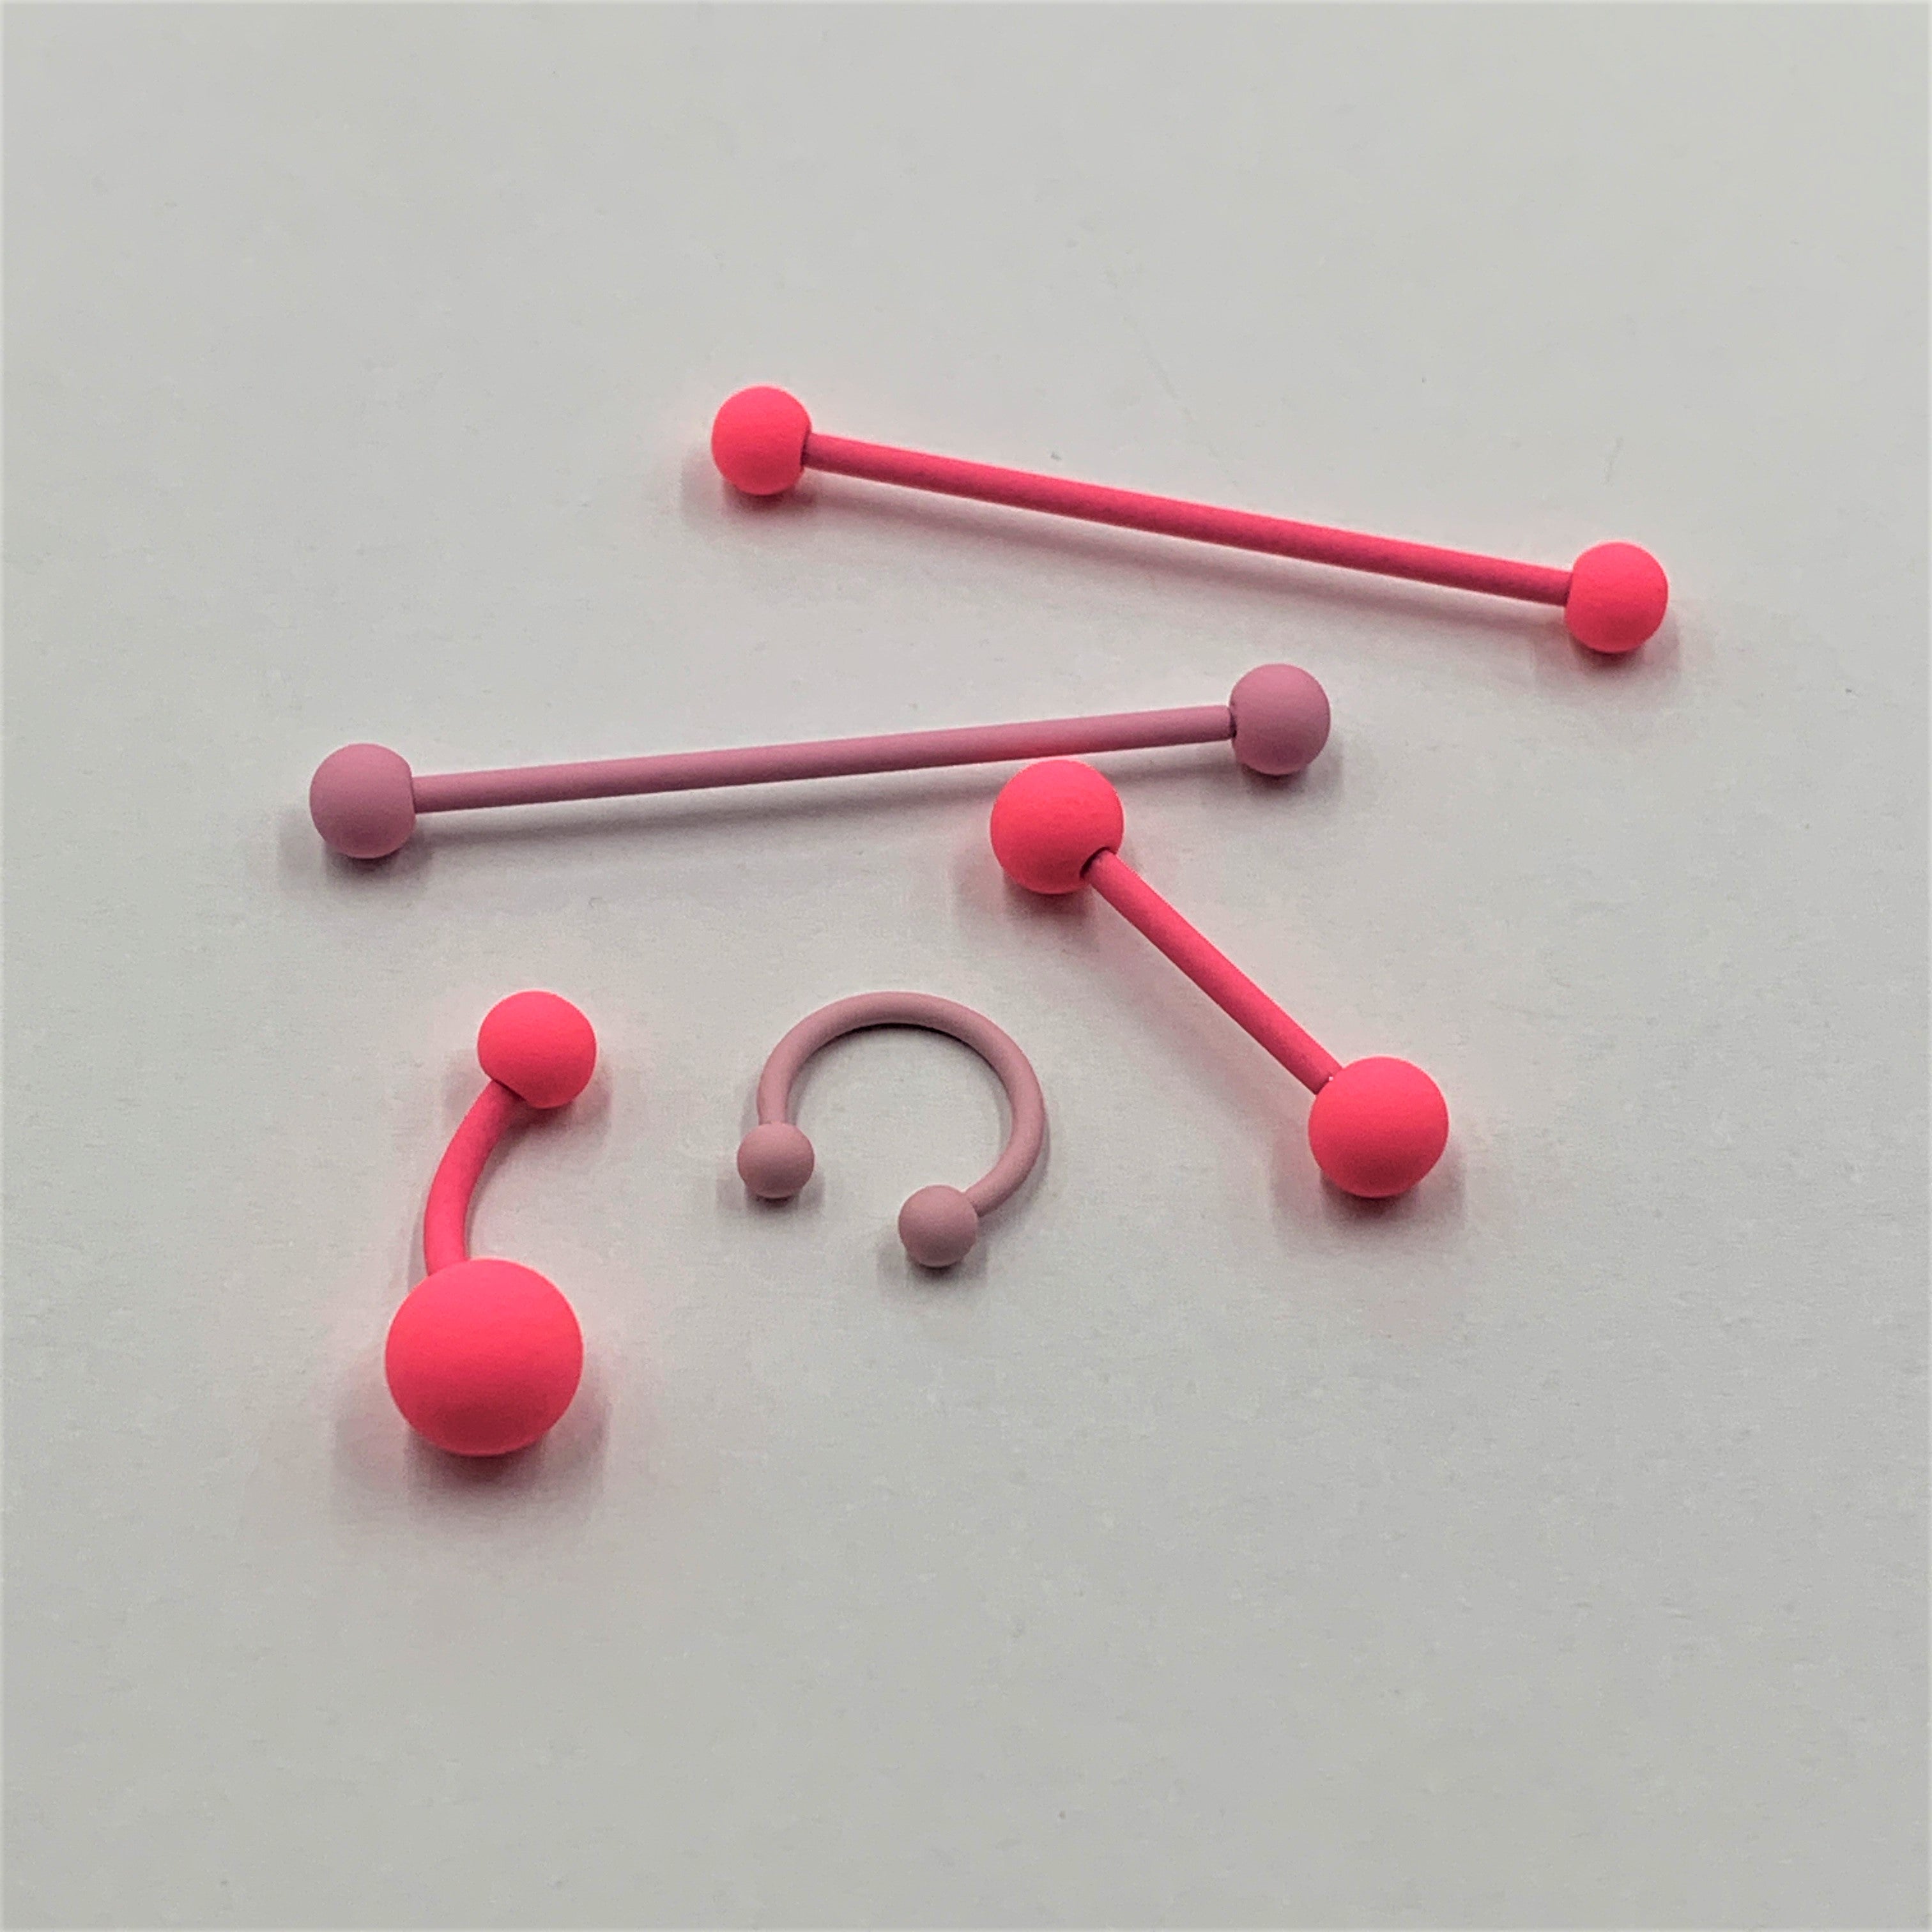 16 Gauge Punk Rock Safety Pin Industrial Barbell 38mm - Surgical Grade Stainless Steel Barbell Industrial - Body Candy